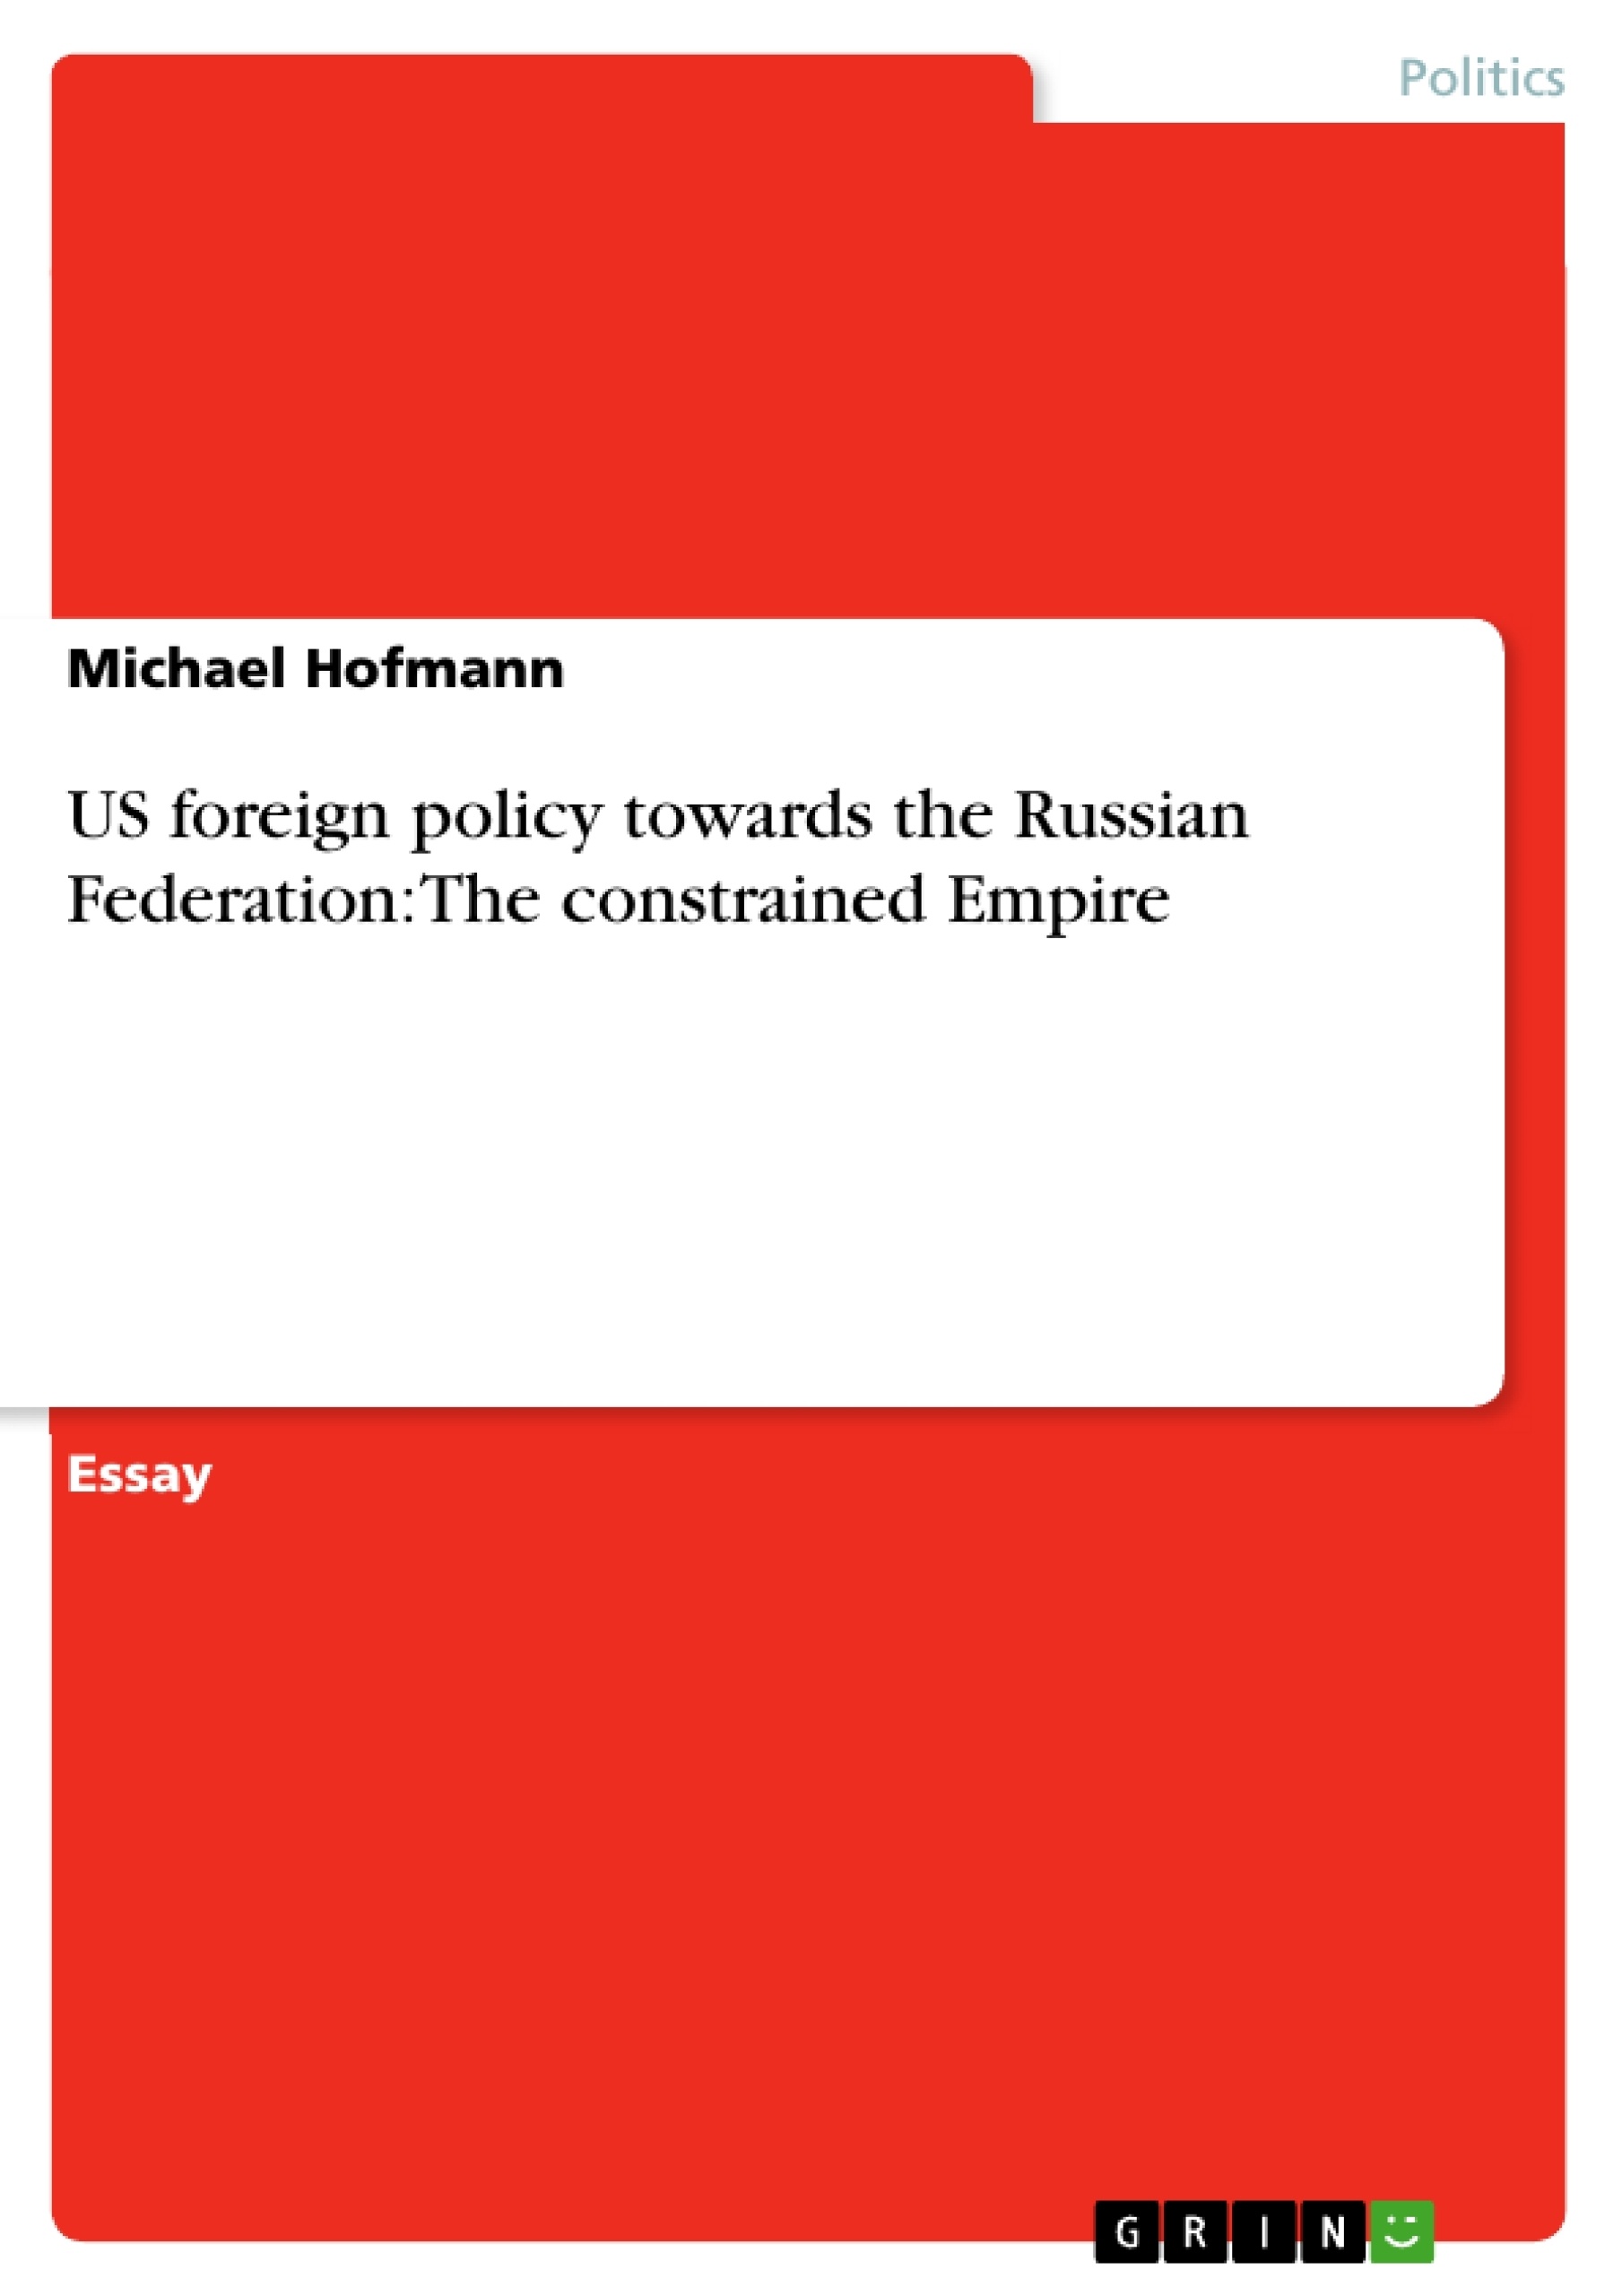 Titre: US foreign policy towards the Russian Federation: The constrained Empire